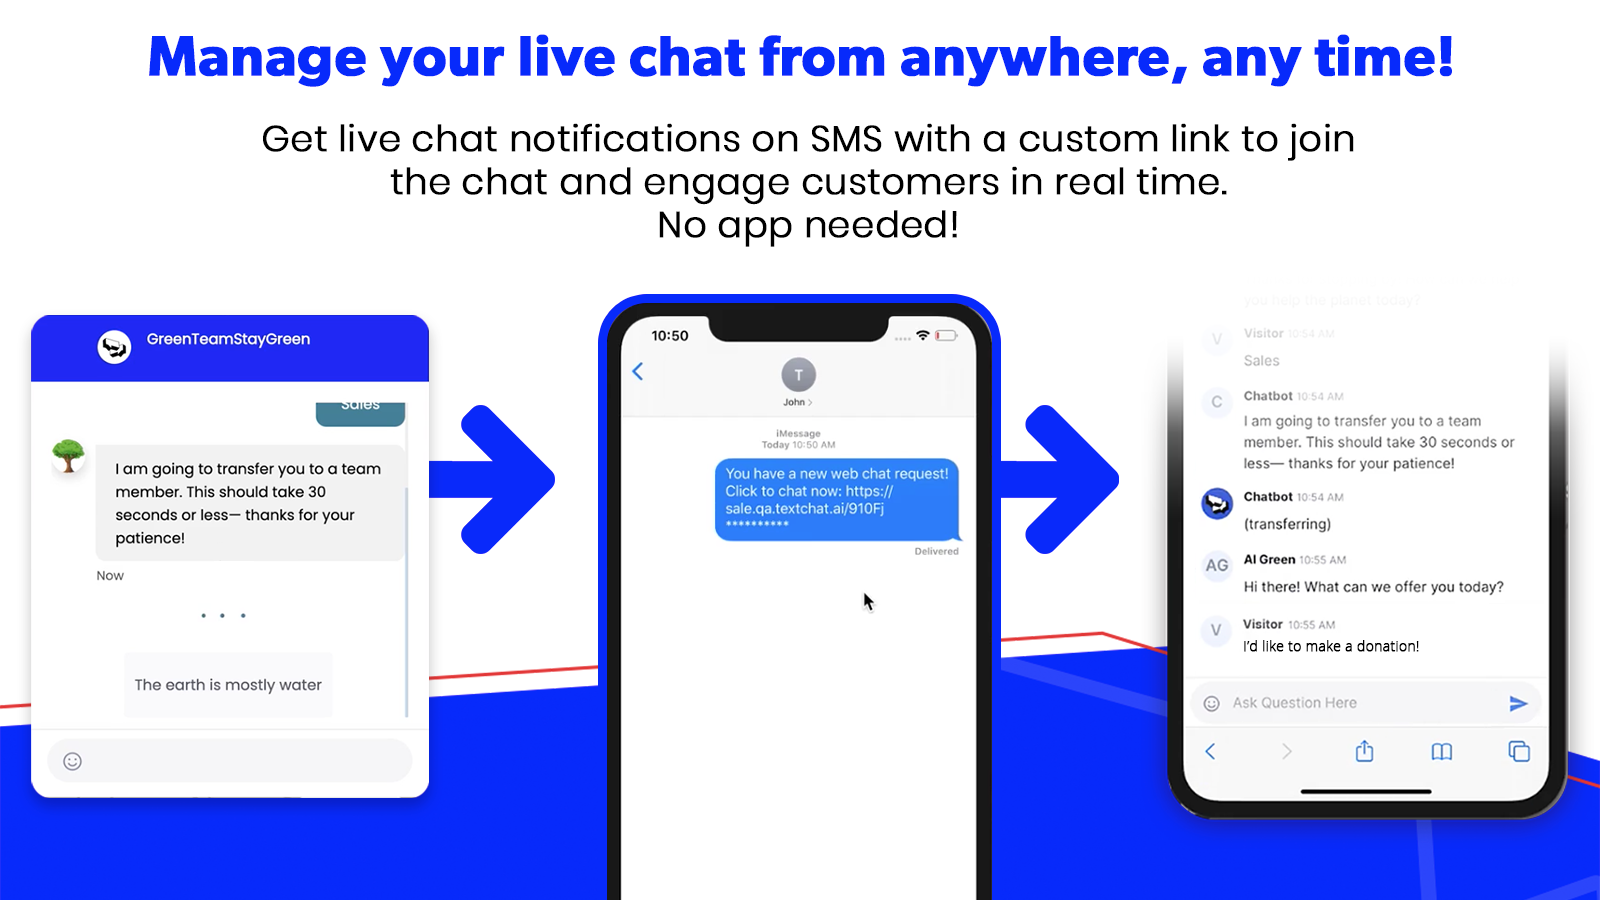 Manage your live chat from anywhere, any time!